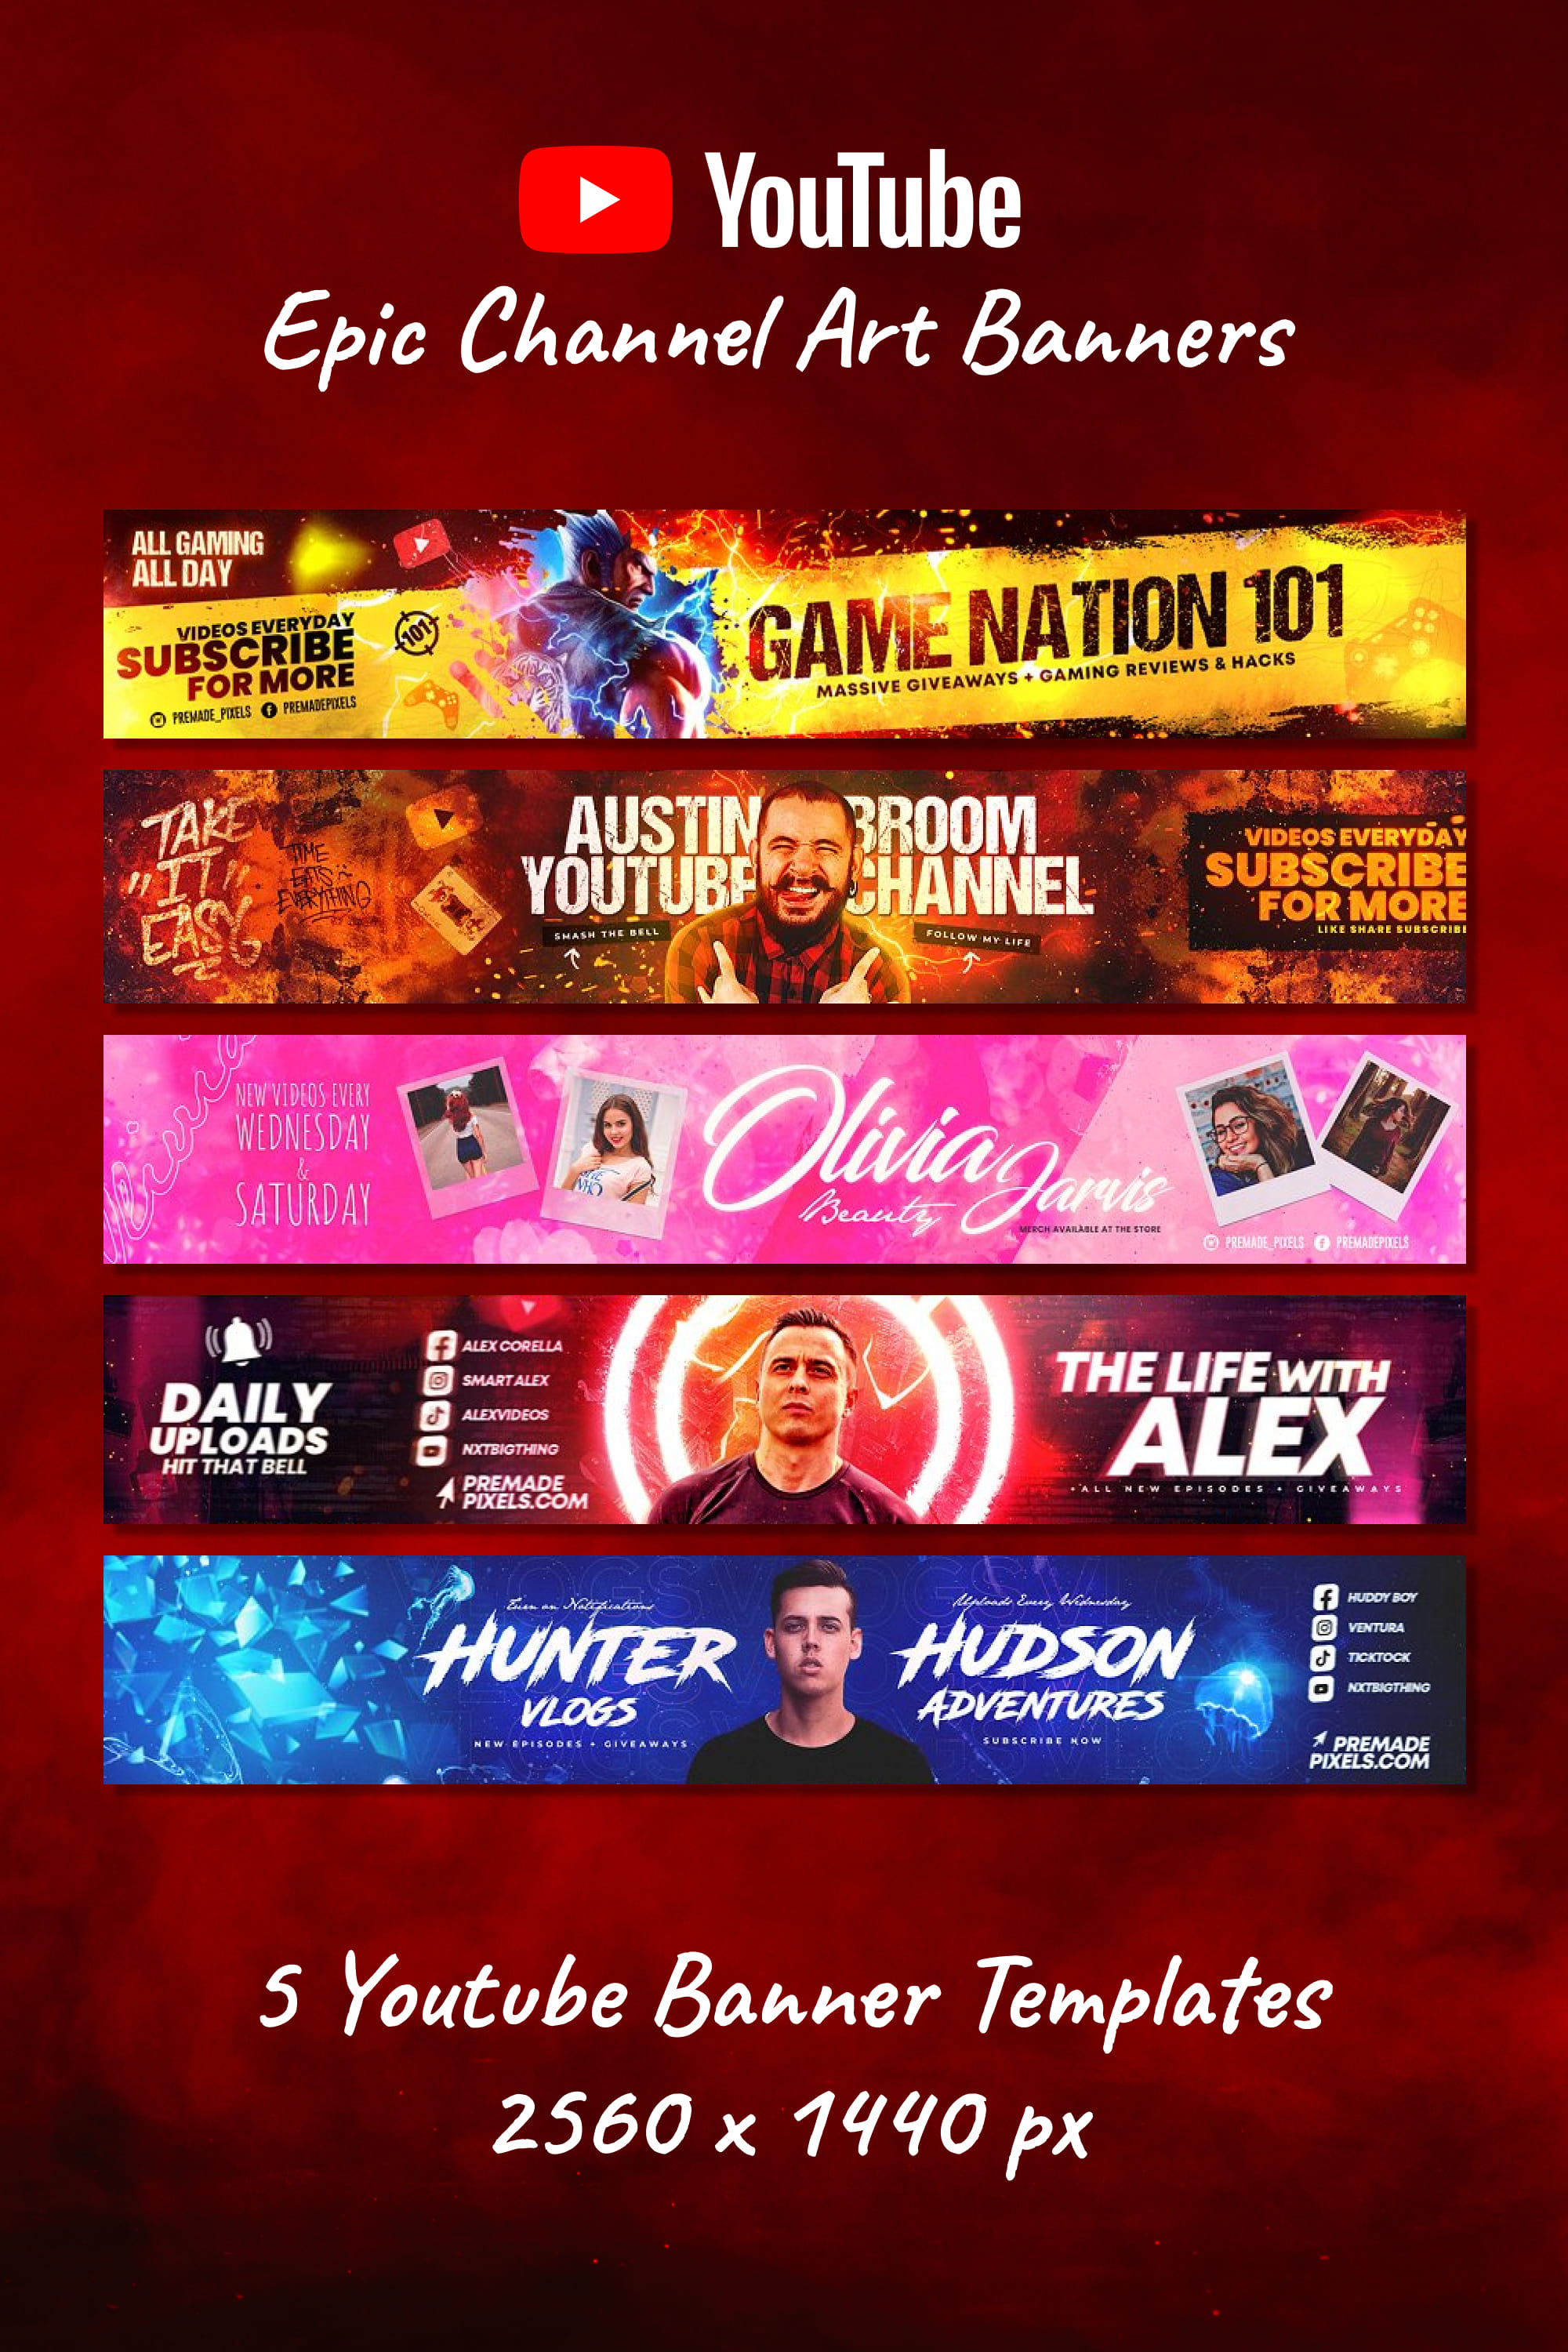 epic youtube channel art banners pinterest